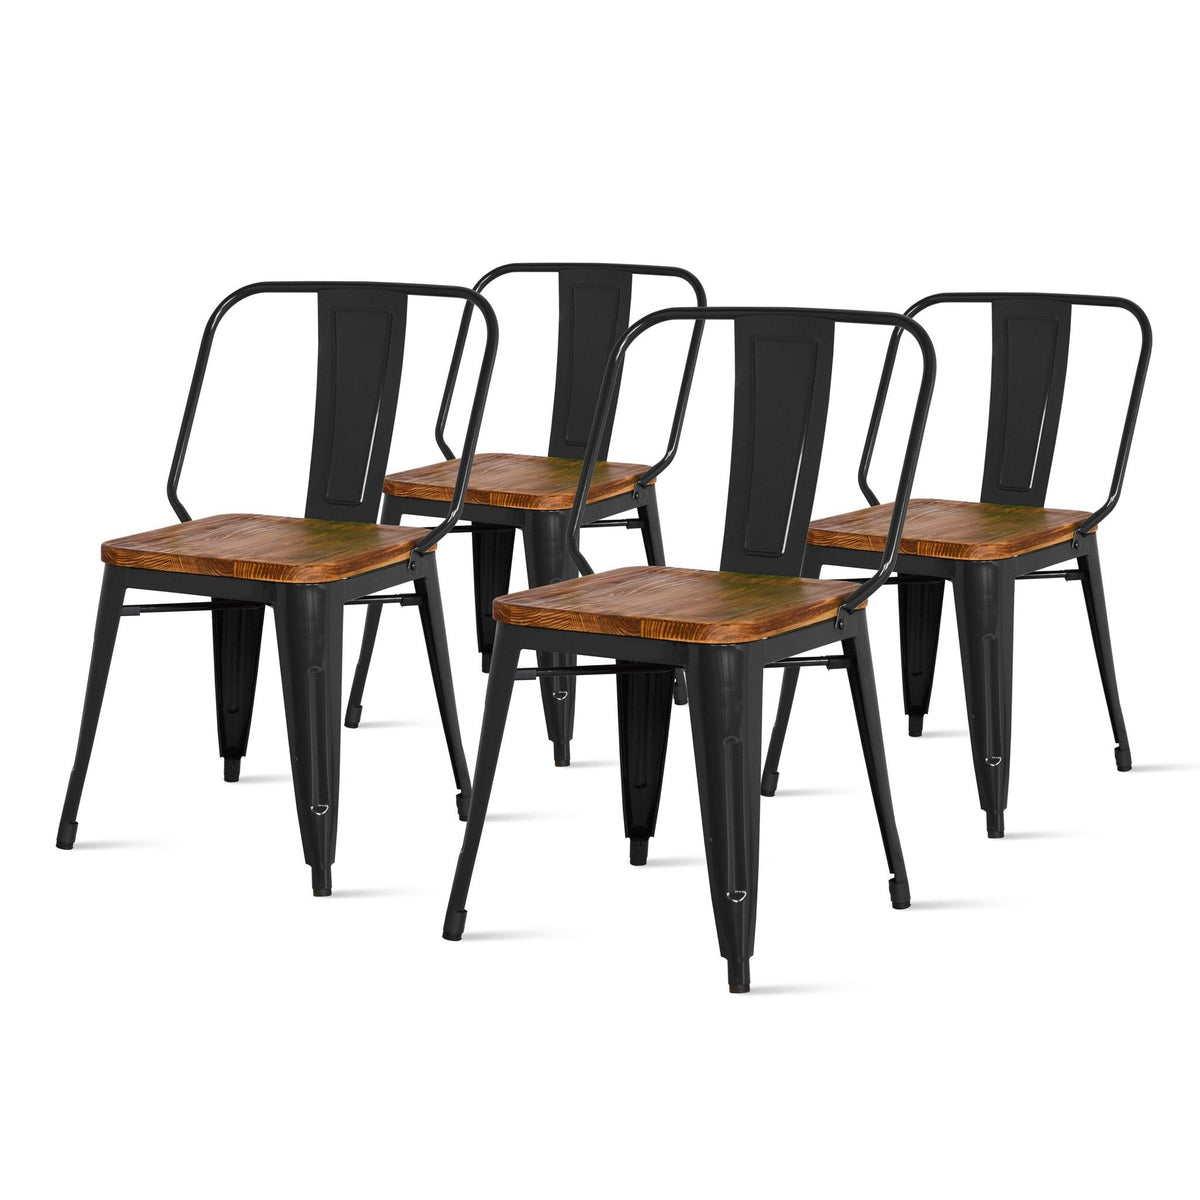 Brian Metal Side Chair (Set of 4) by New Pacific Direct - 938232